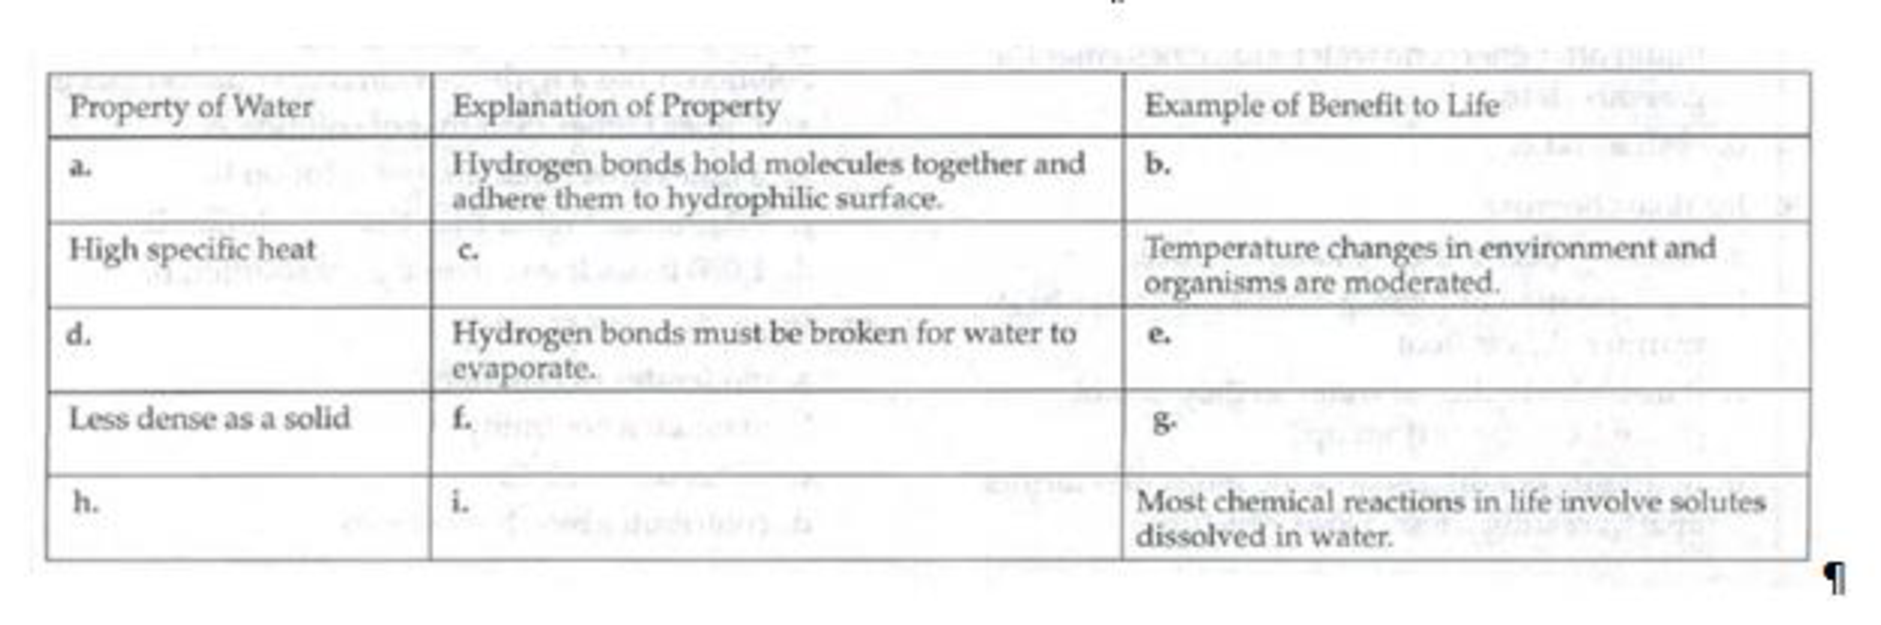 Chapter 3, Problem 1SYK, Fill in the following table, which summarizes the emergent properties of water that contribute to 